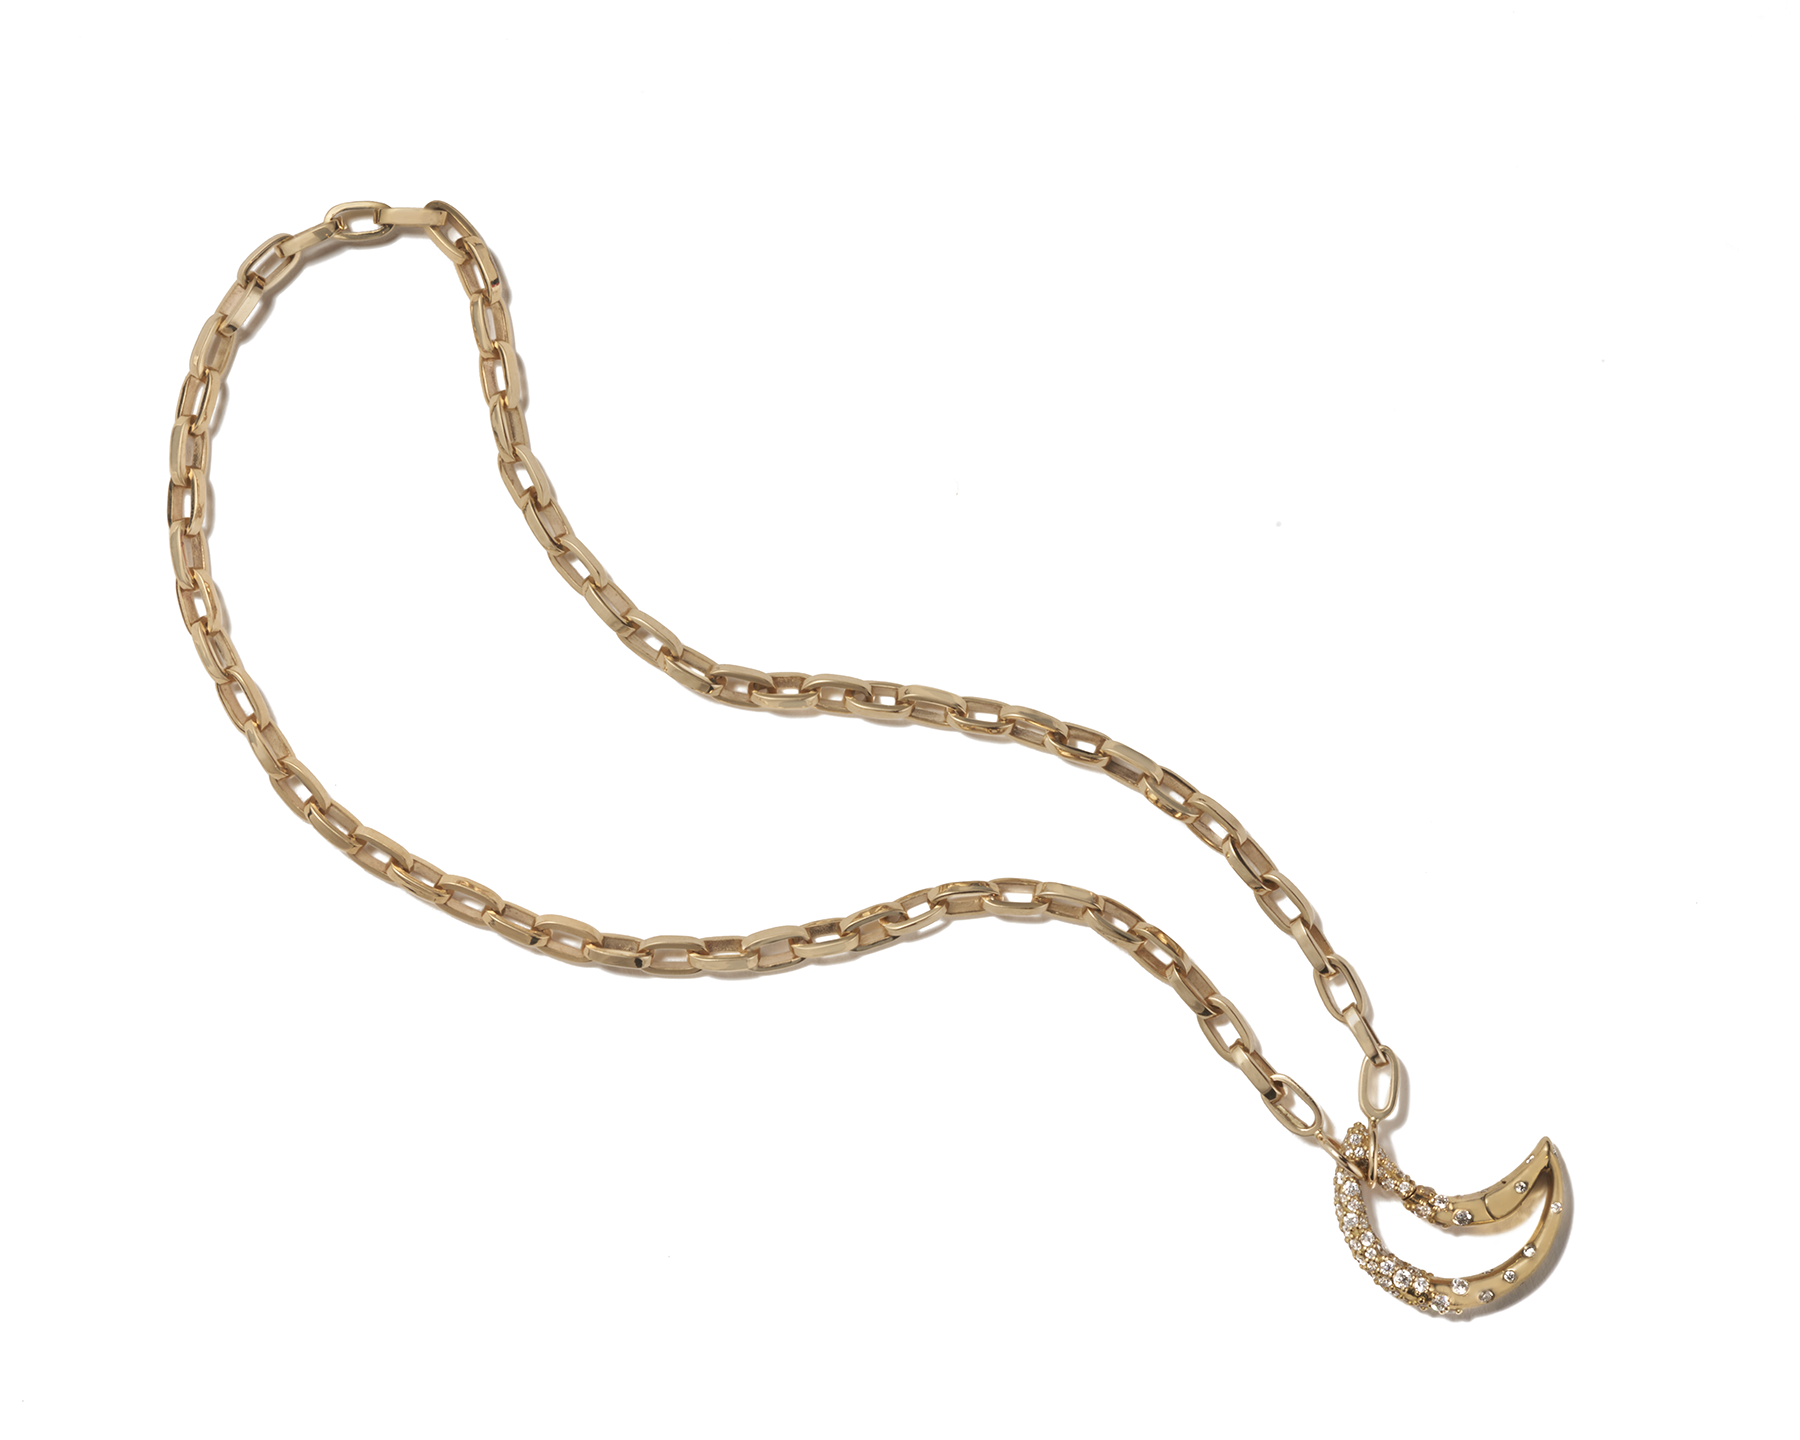  Enamel Color Chunky Chain with Screw Link Clasp 18K Necklace  (Multi-Color) : Handmade Products